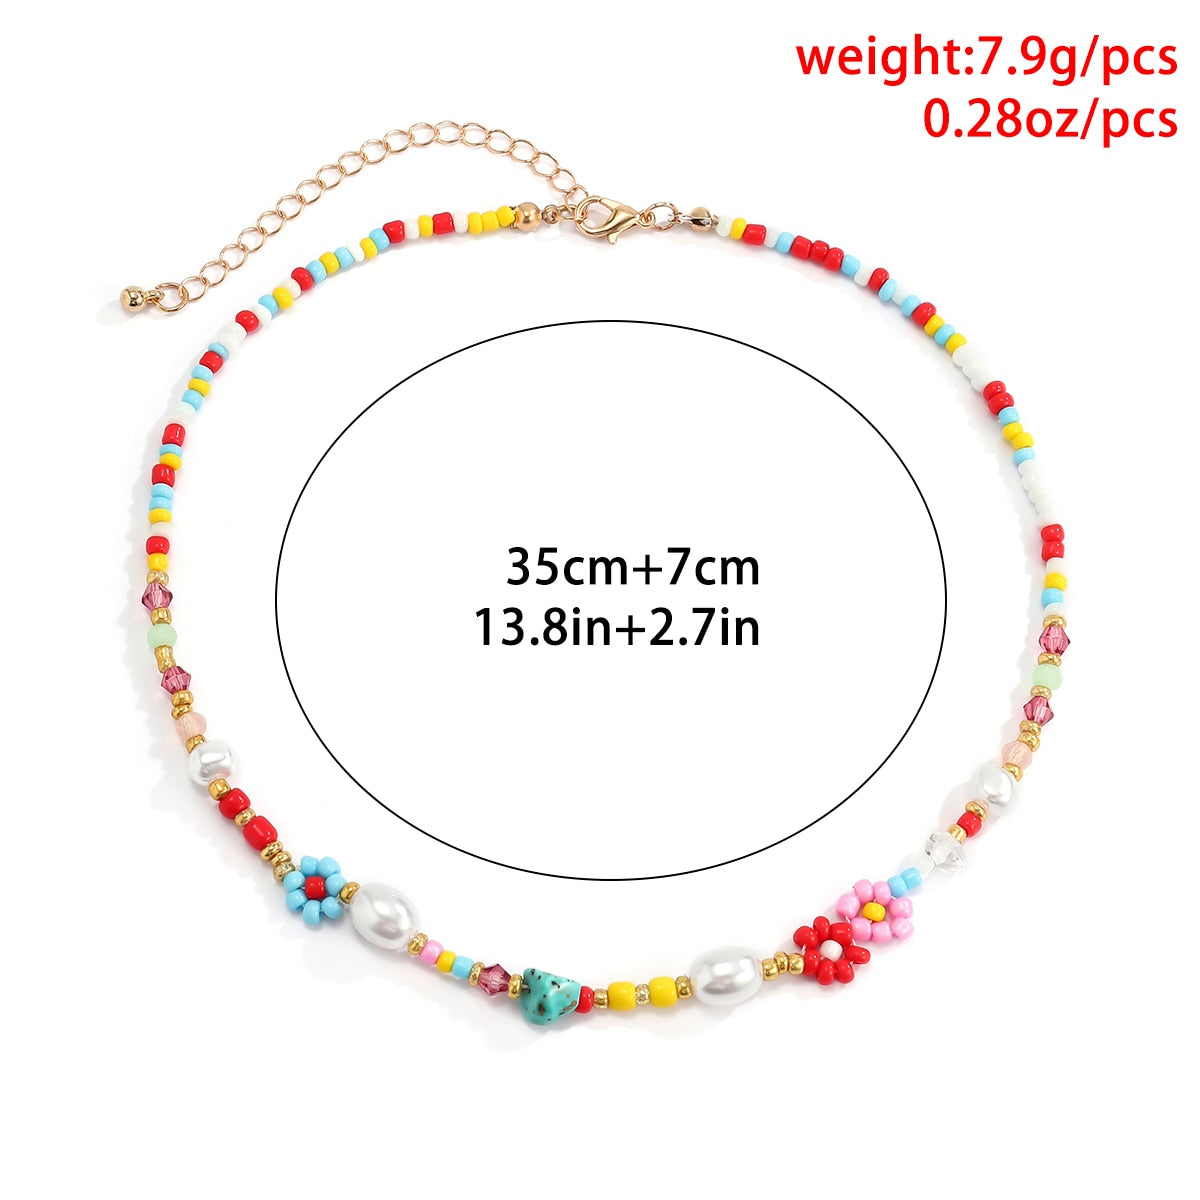 Maytrends Simulated Pearls Cute Flowers Colorful Hand-woven Beaded Short Clavicle Chain Choker Necklace For Women Girls Jewelry